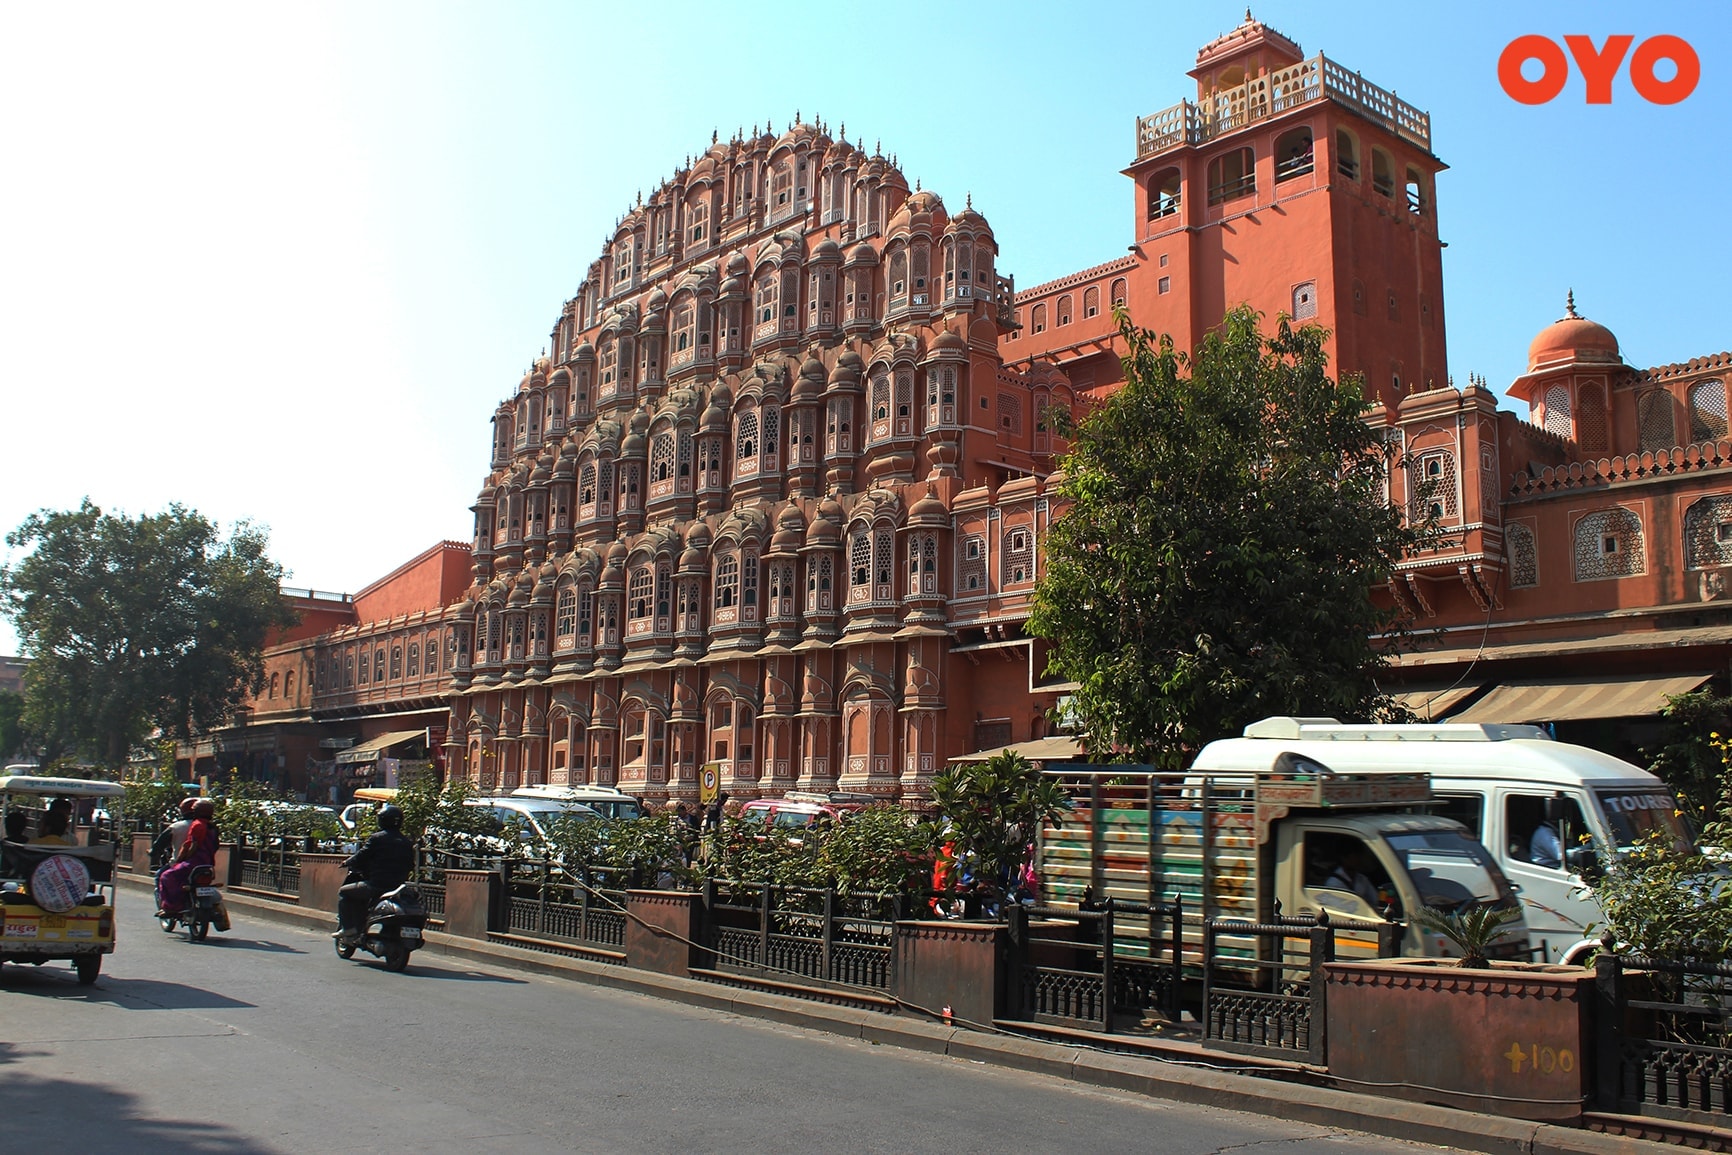 Hawa Mahal, Jaipur - one of the most famous historical monuments in India